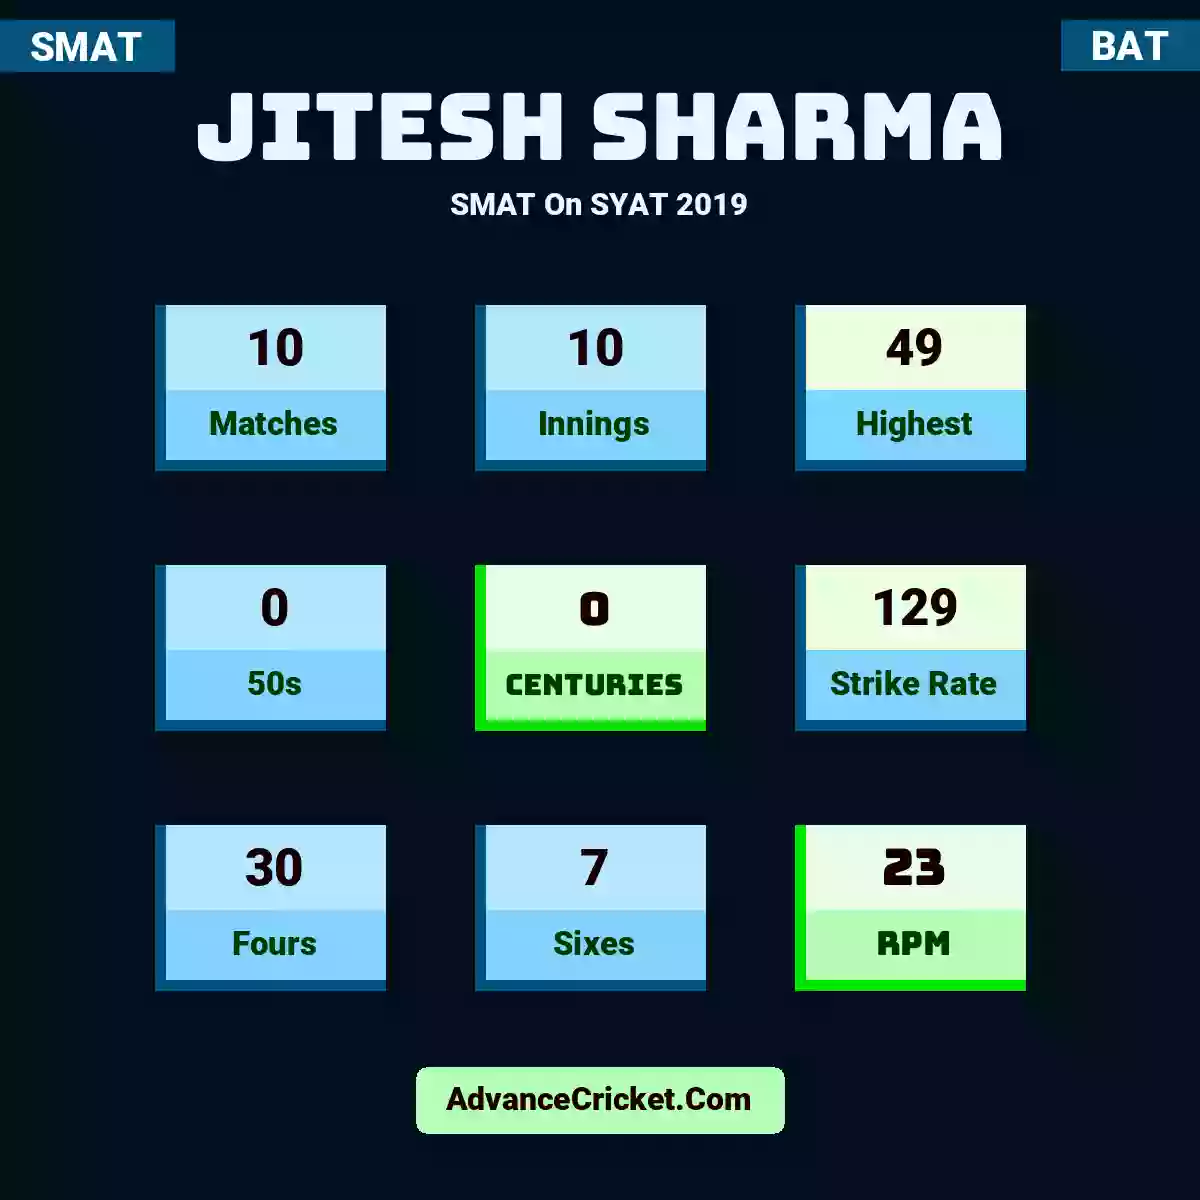 Jitesh Sharma SMAT  On SYAT 2019, Jitesh Sharma played 10 matches, scored 49 runs as highest, 0 half-centuries, and 0 centuries, with a strike rate of 129. J.Sharma hit 30 fours and 7 sixes, with an RPM of 23.